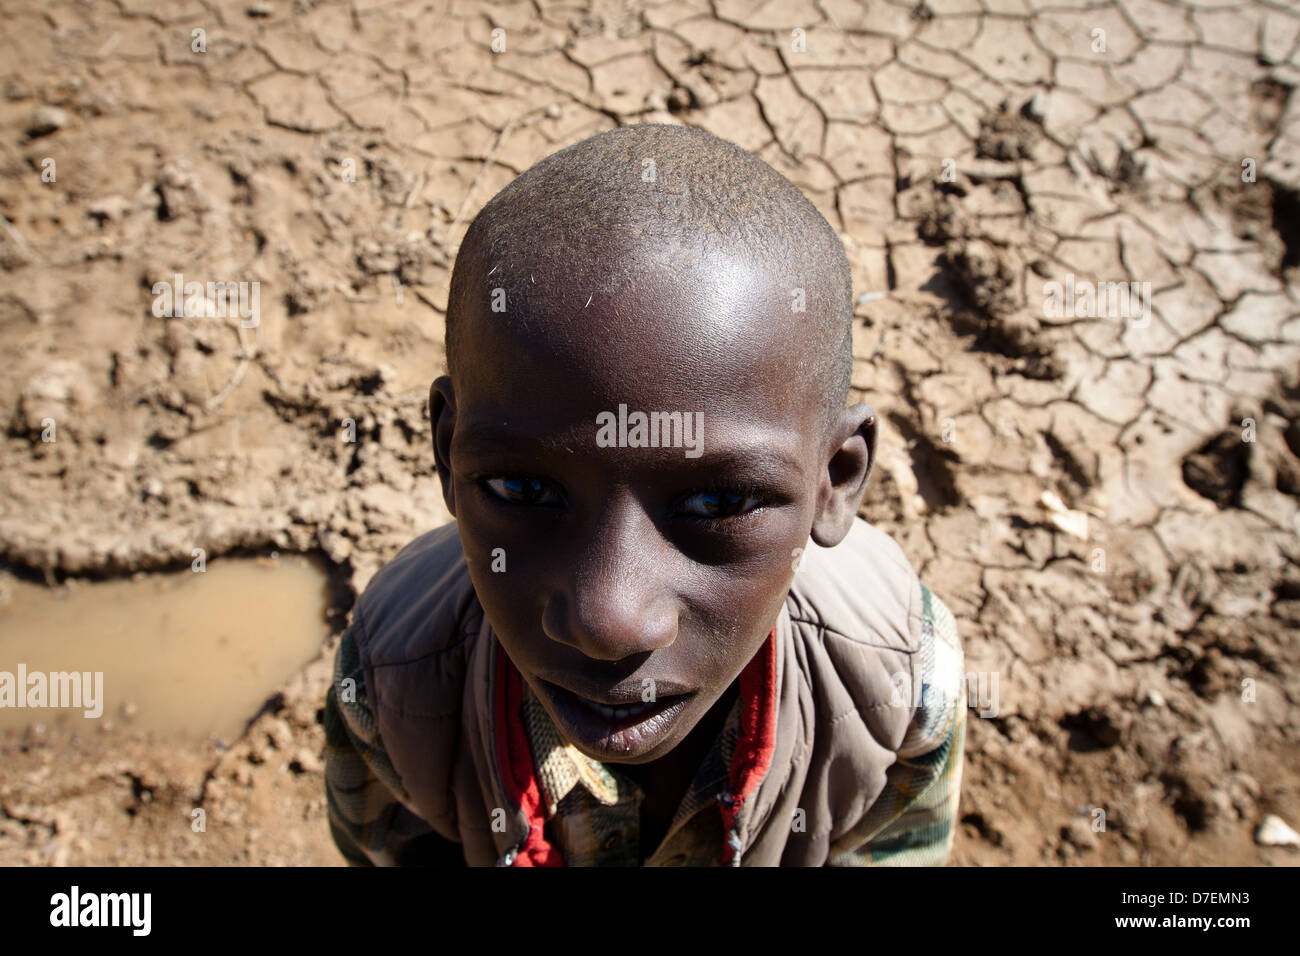 A young child down by a dried river bed in Tahoua Region of Niger Stock Photo